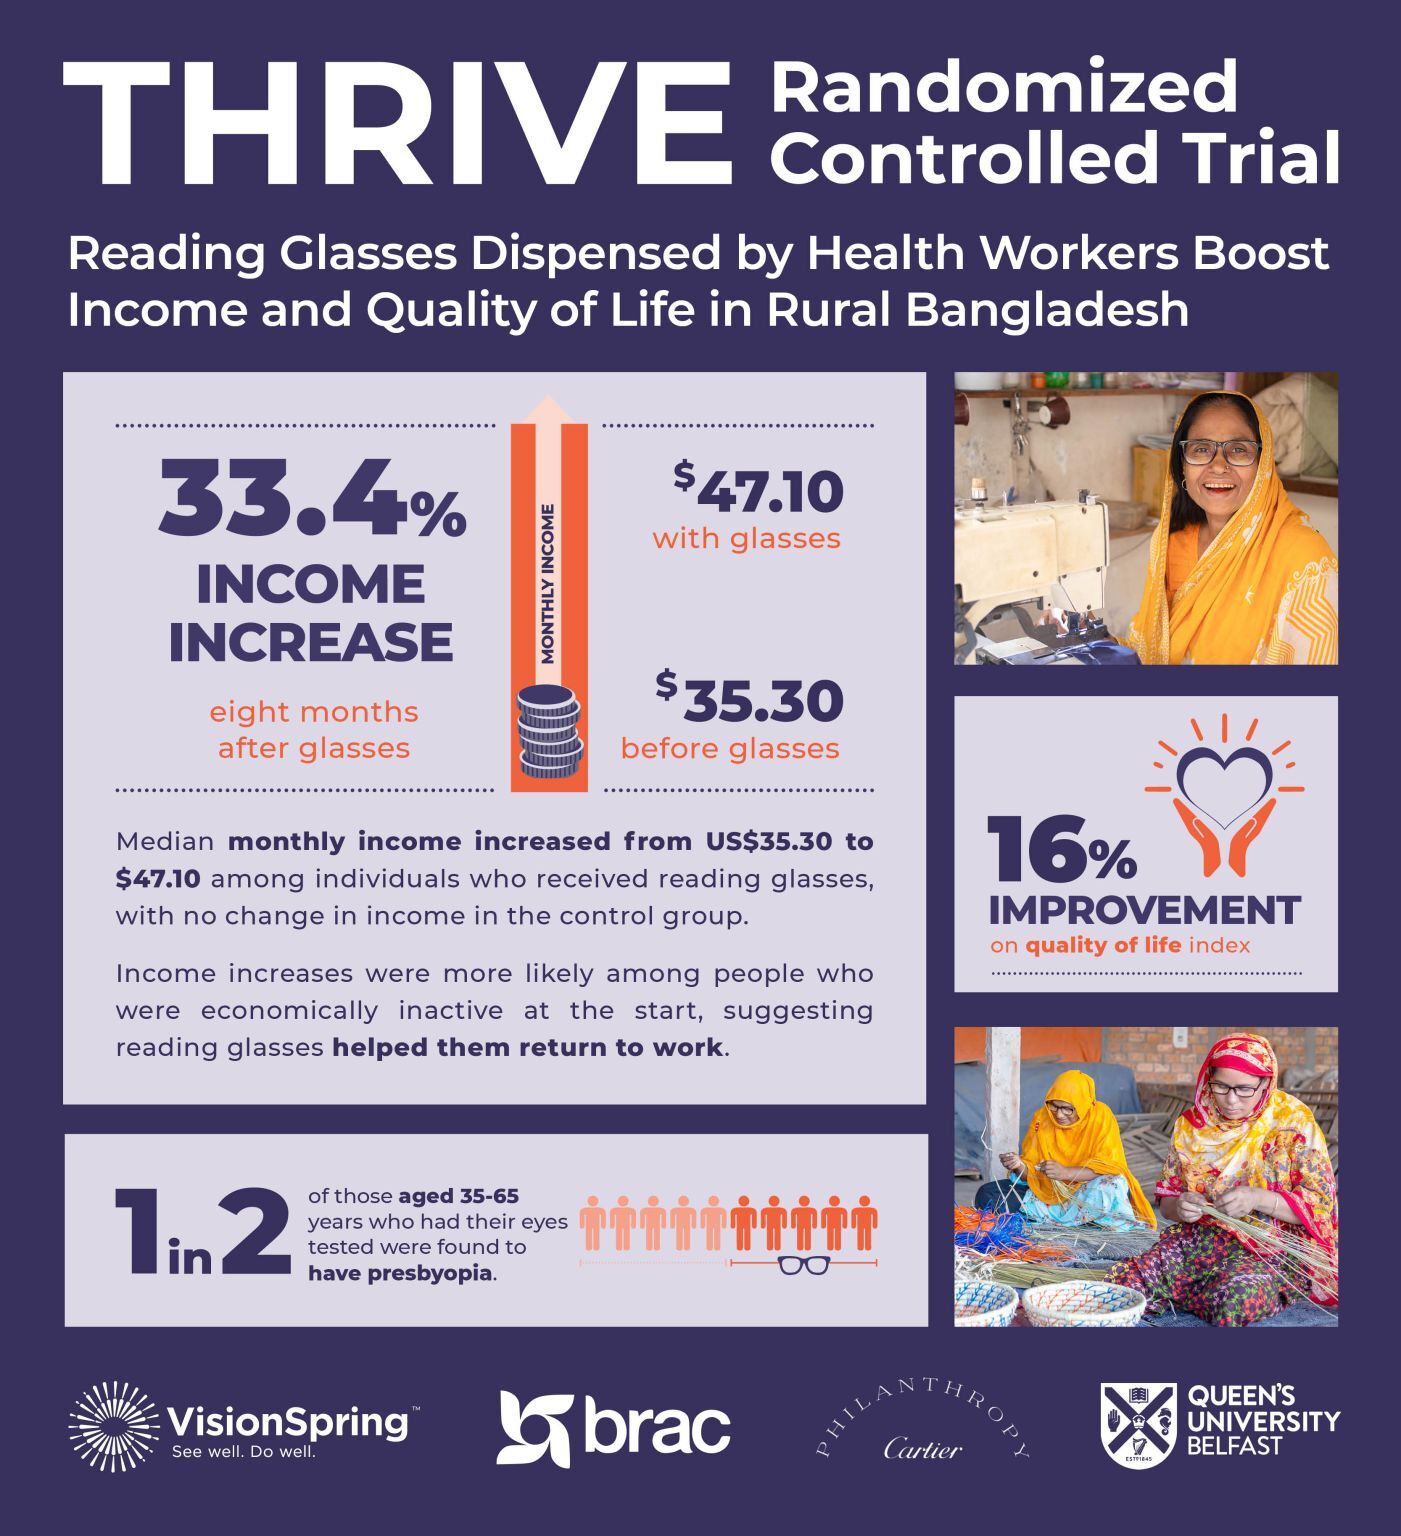 Transforming Lives Through Vision: VisionSpring’s THRIVE Study receives international media coverage